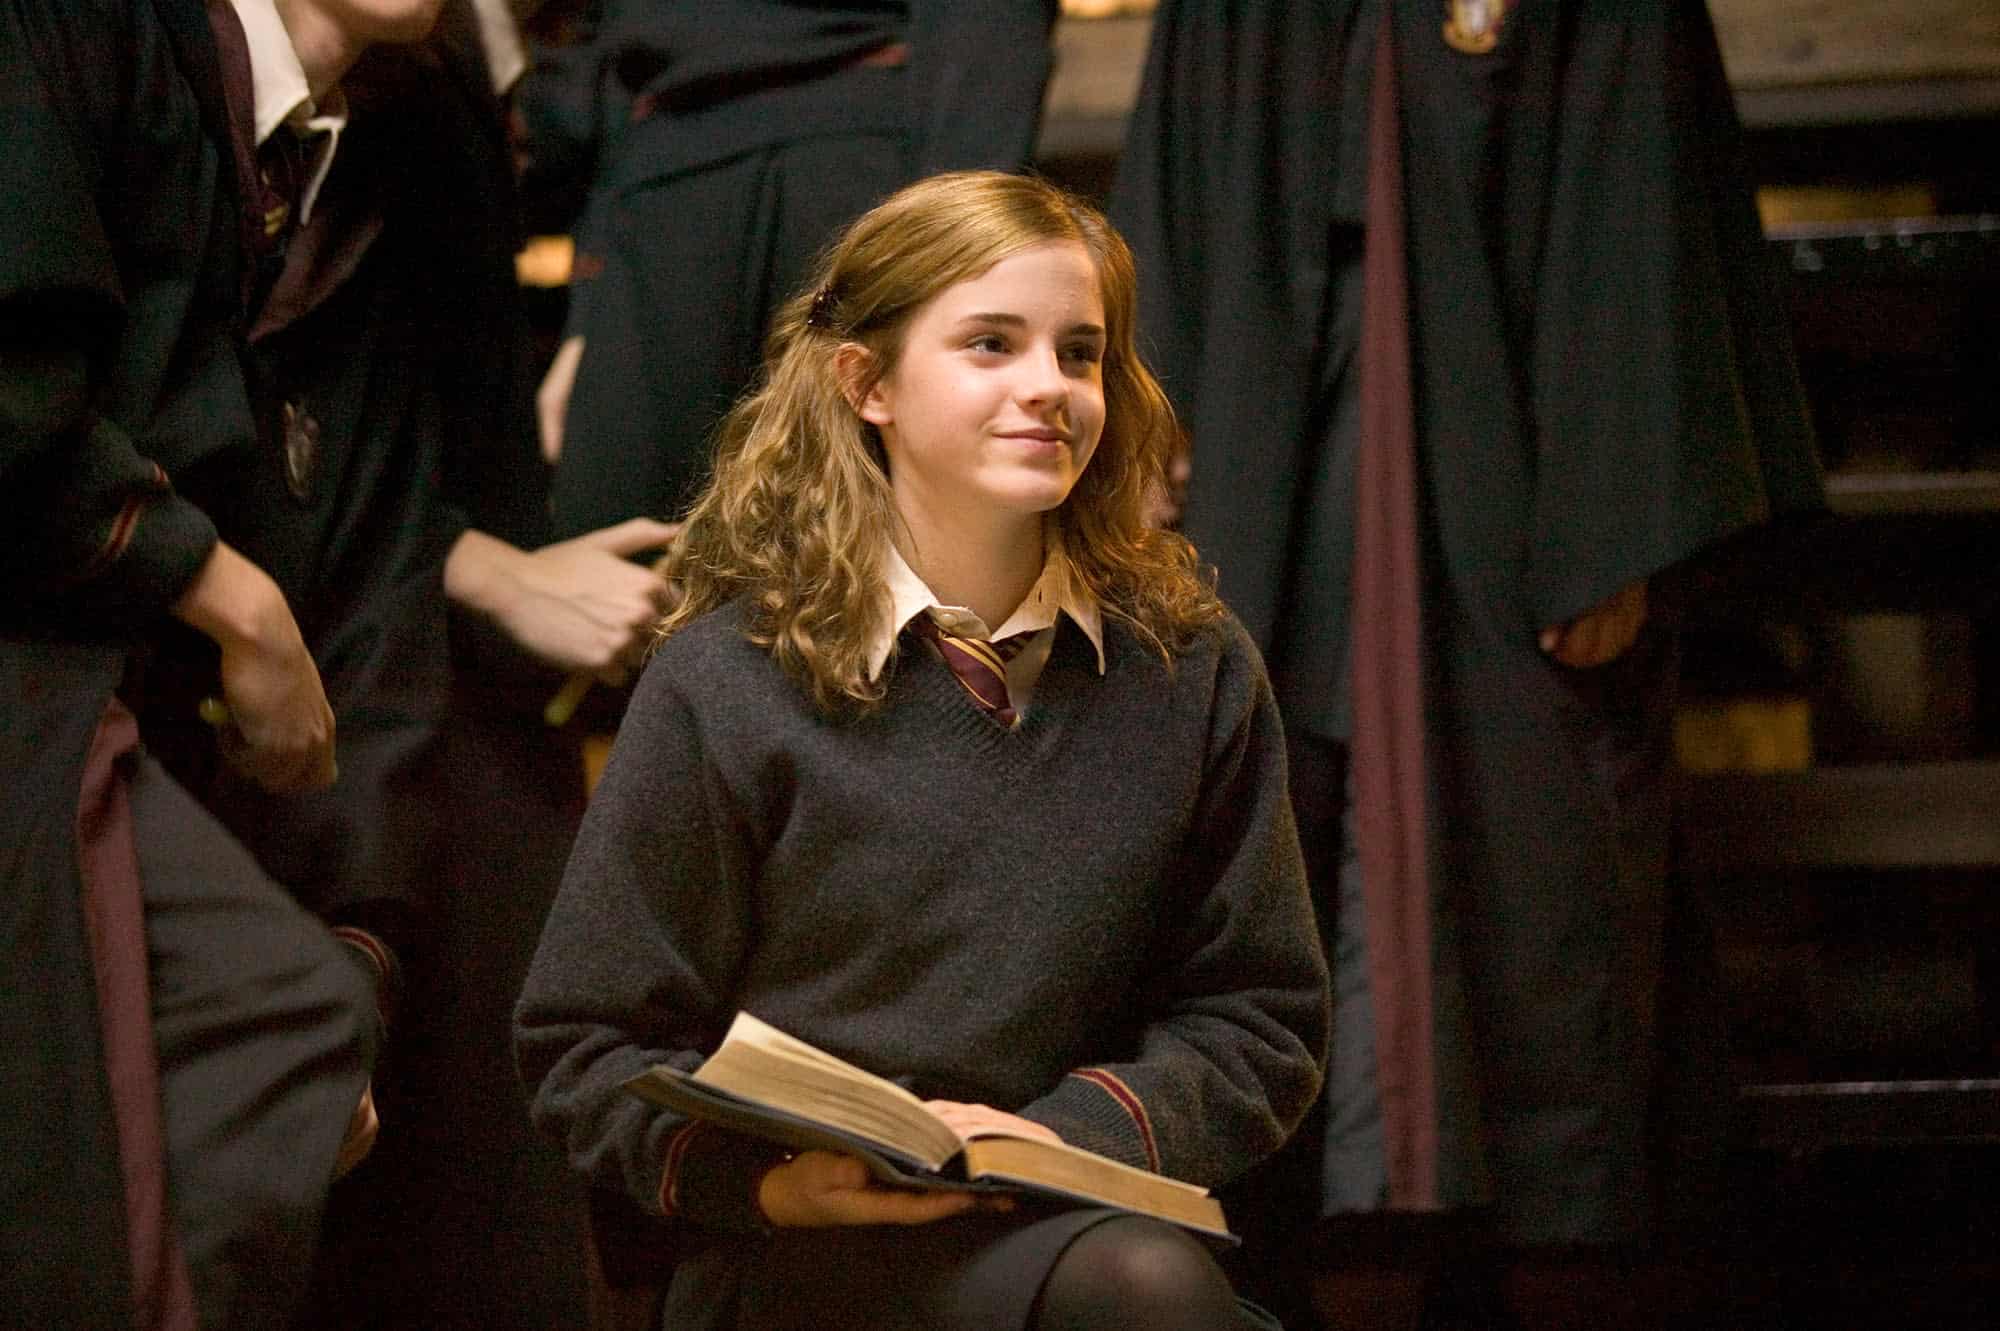 A schoolgirl sits with a book in this image from HBO Max